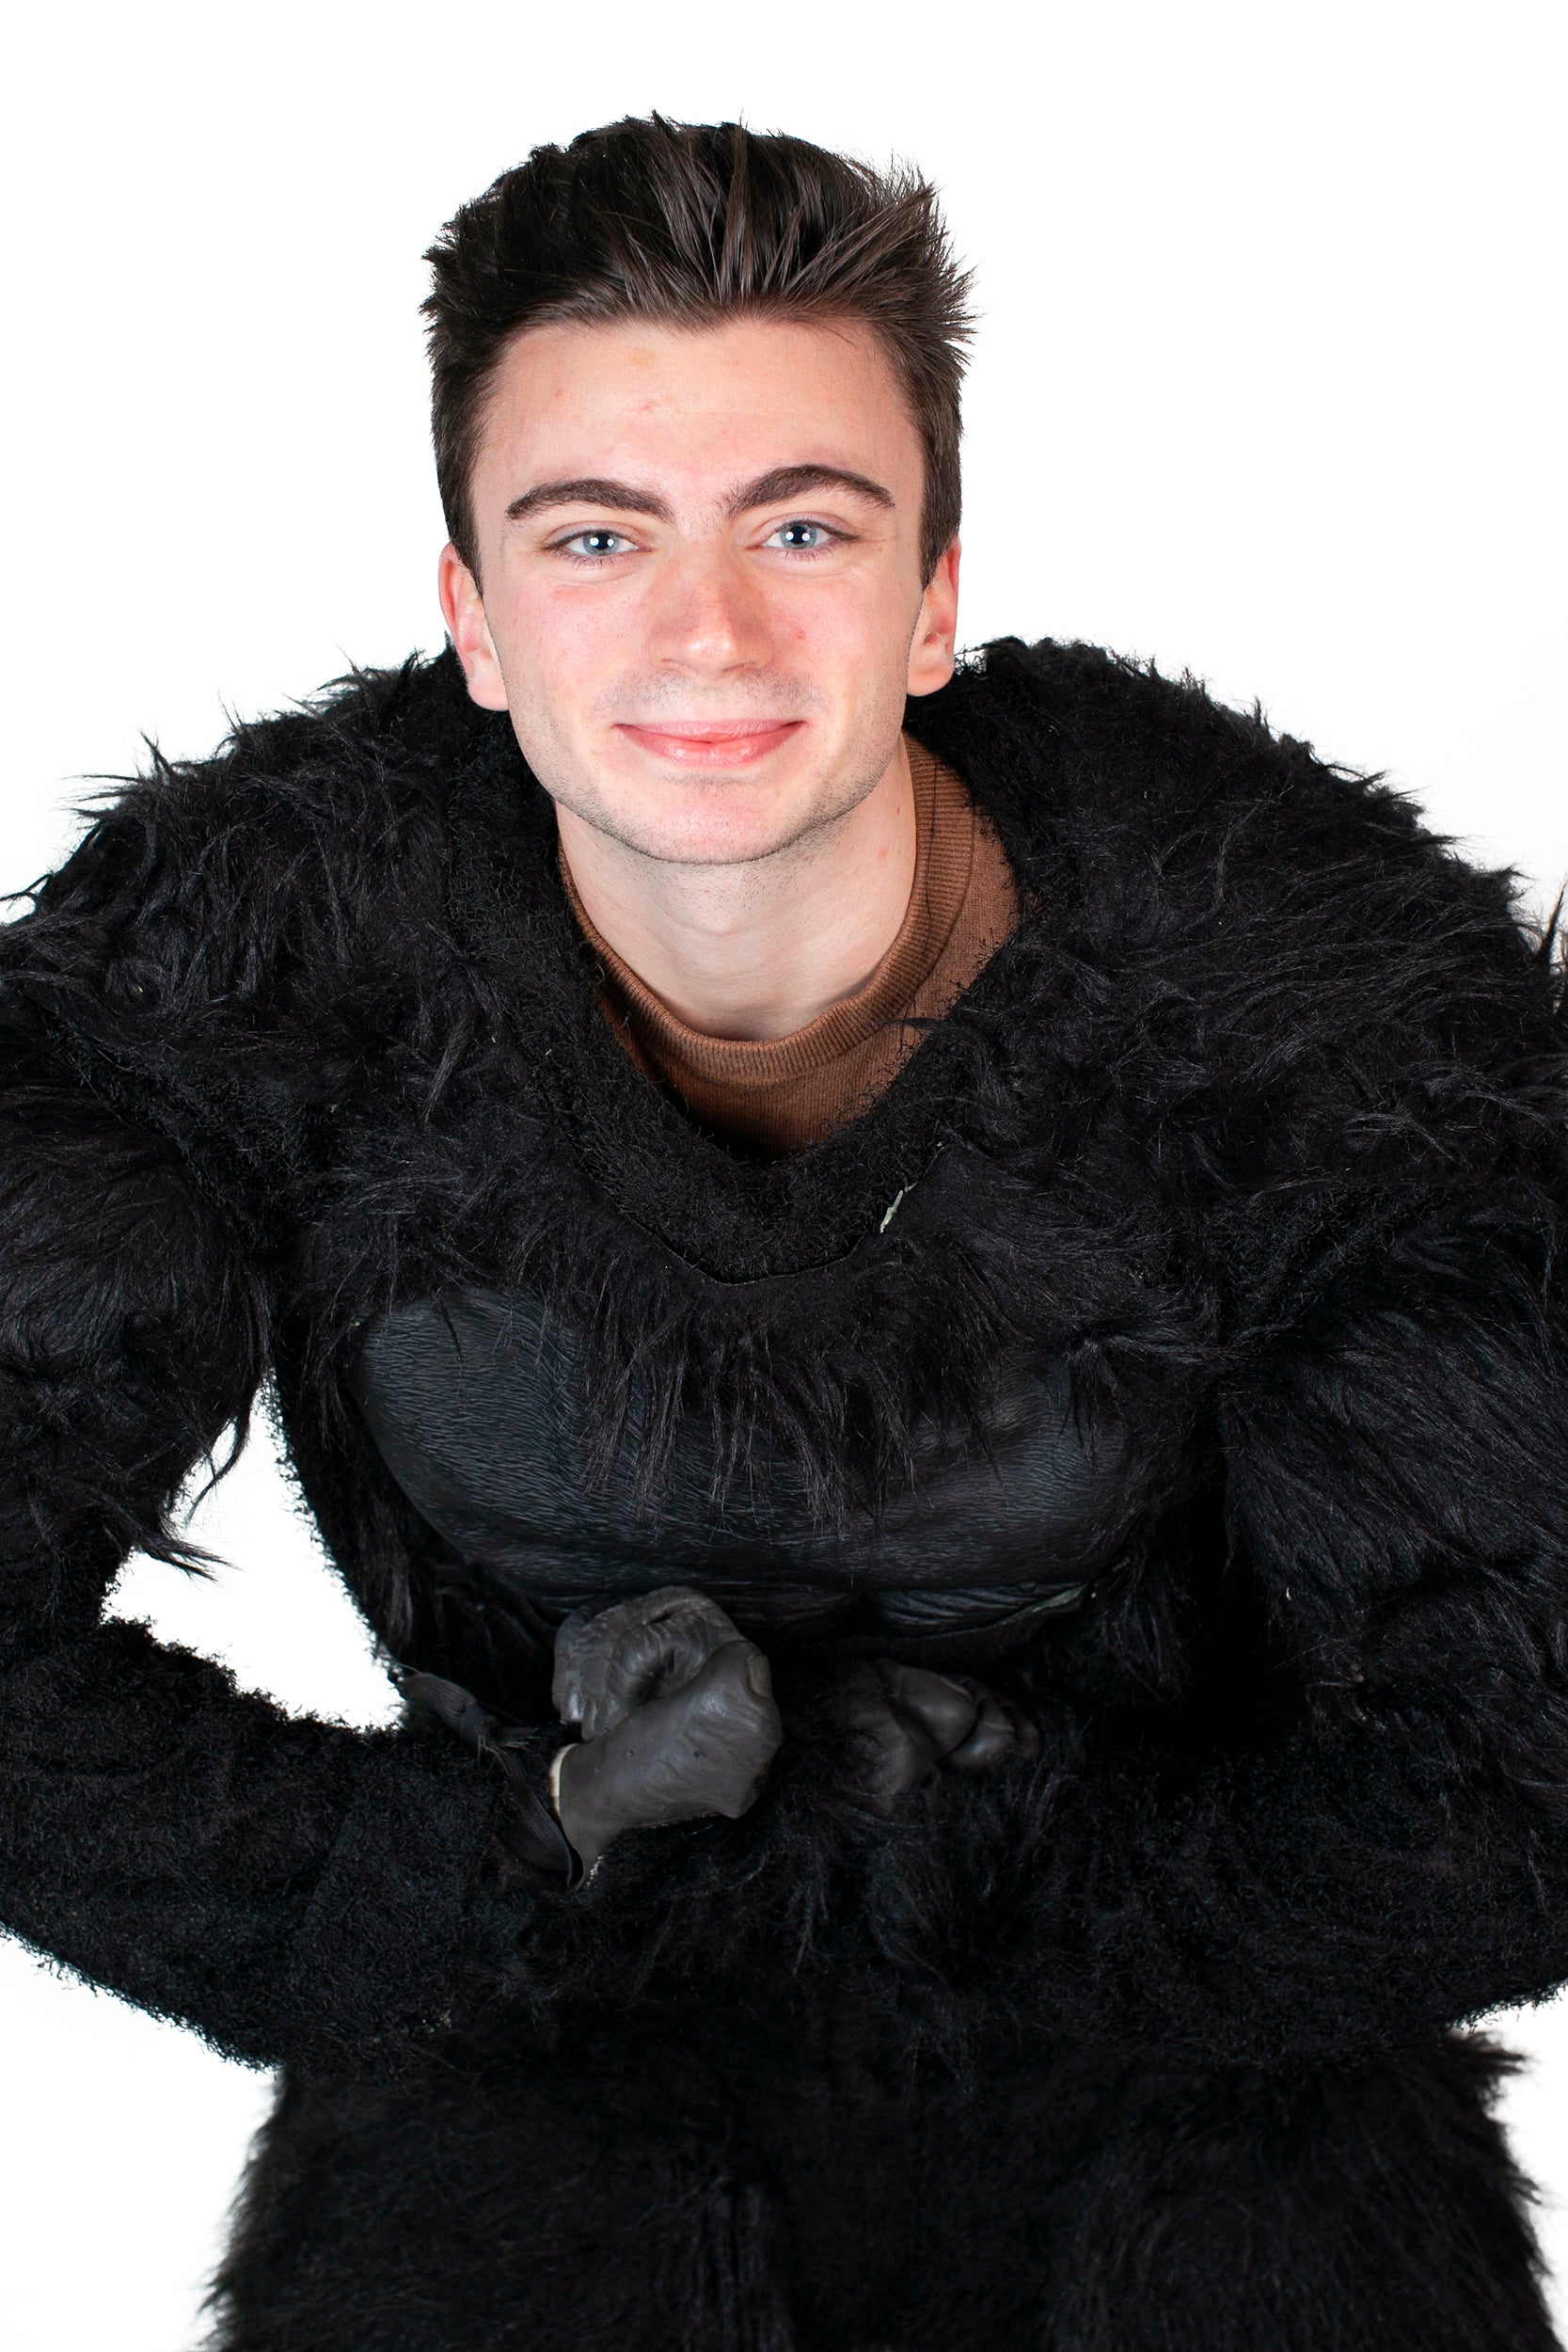 Nick Lore-Edwards dresses as the Gorilla Mascot for Mather House.